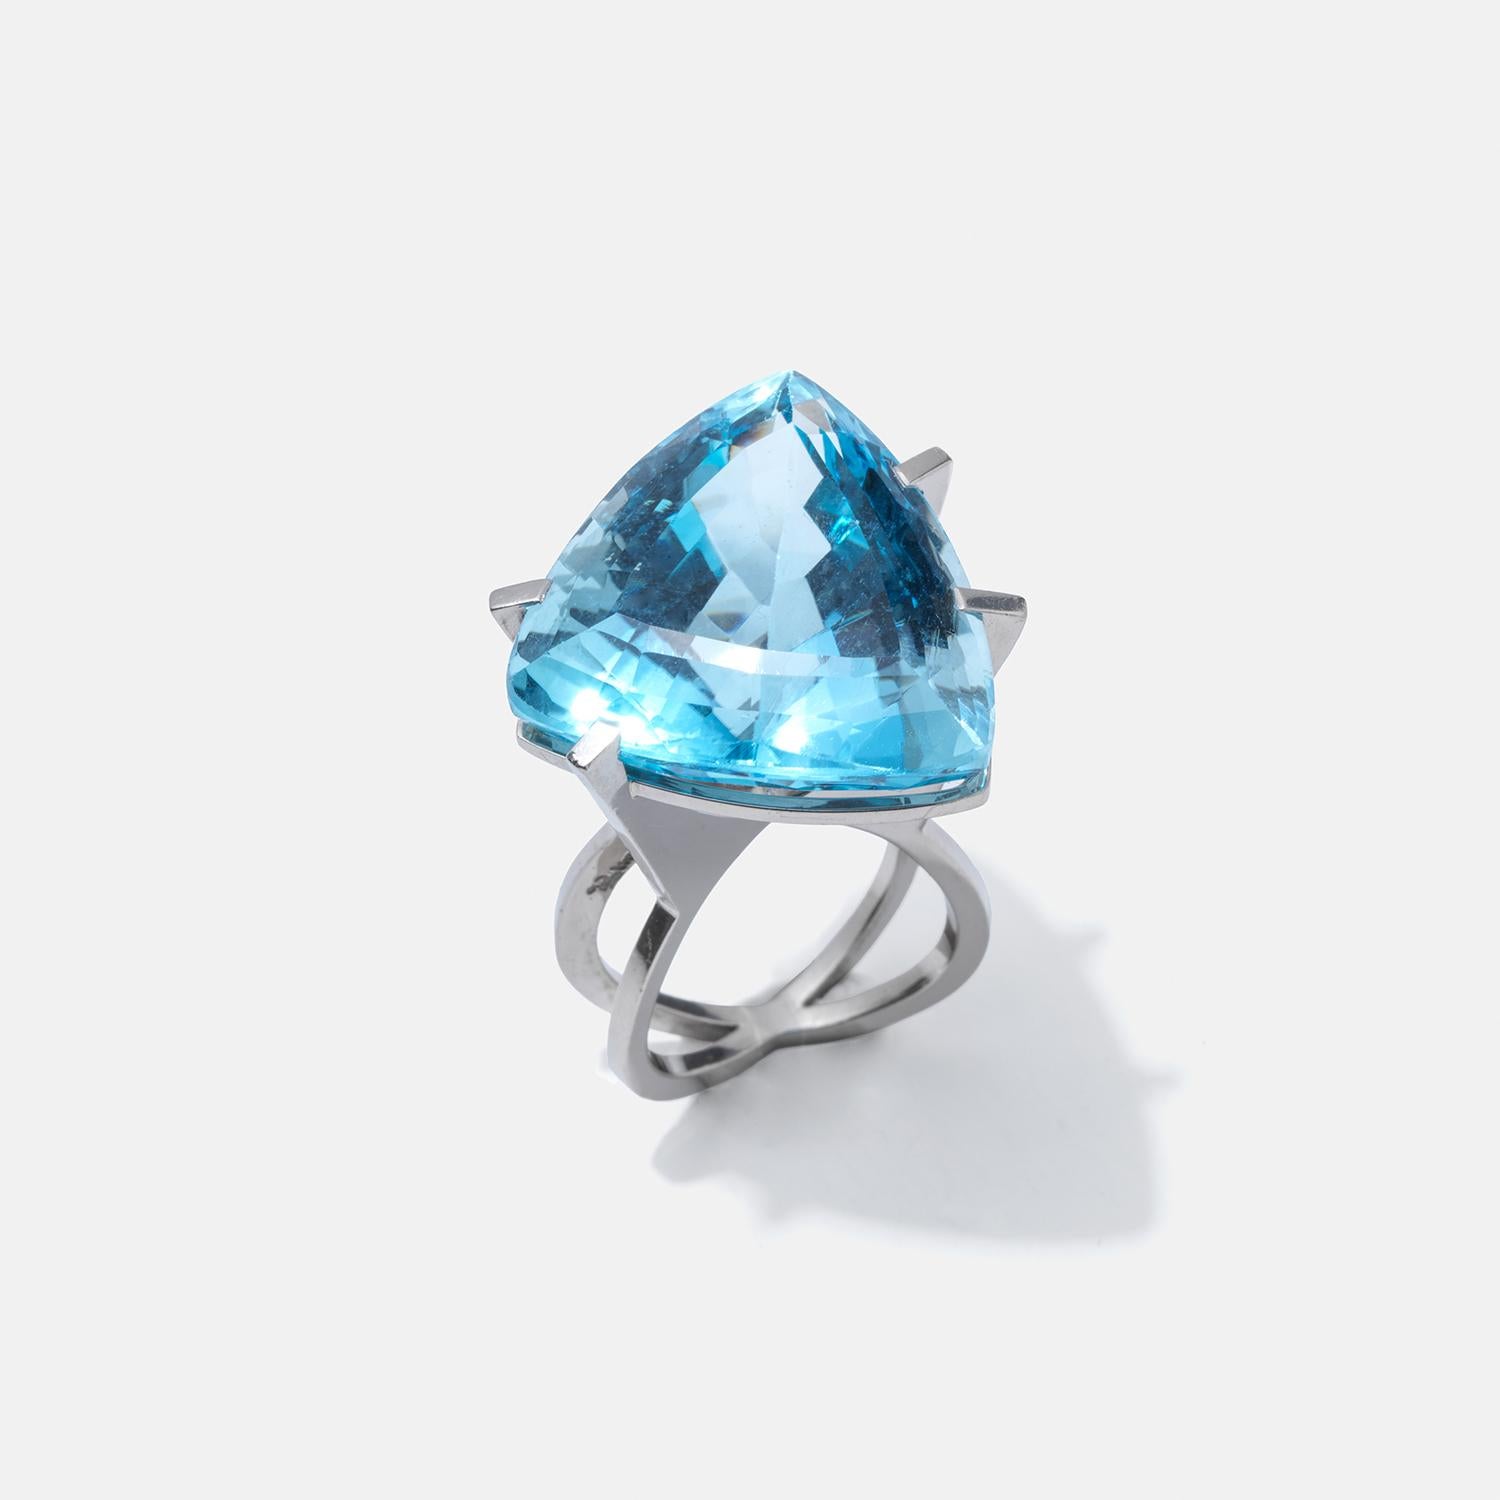 Vintage 18k White Gold and Topaz Ring by Swedish Master Rey Urban Made Year 1991 For Sale 2